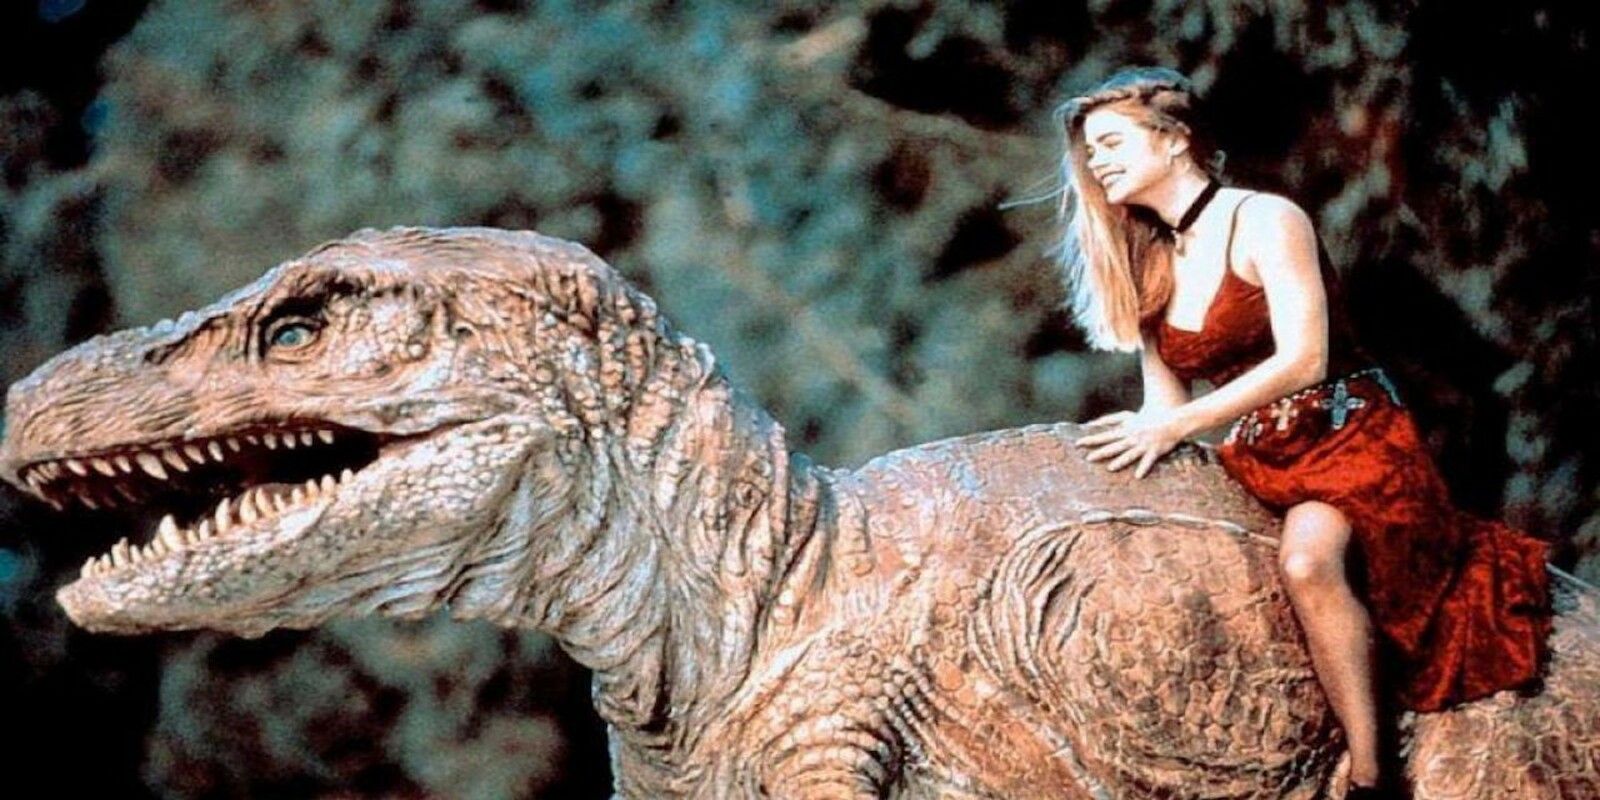 Tammy rides an animatronic dinosaur in Tammy and the T-Rex